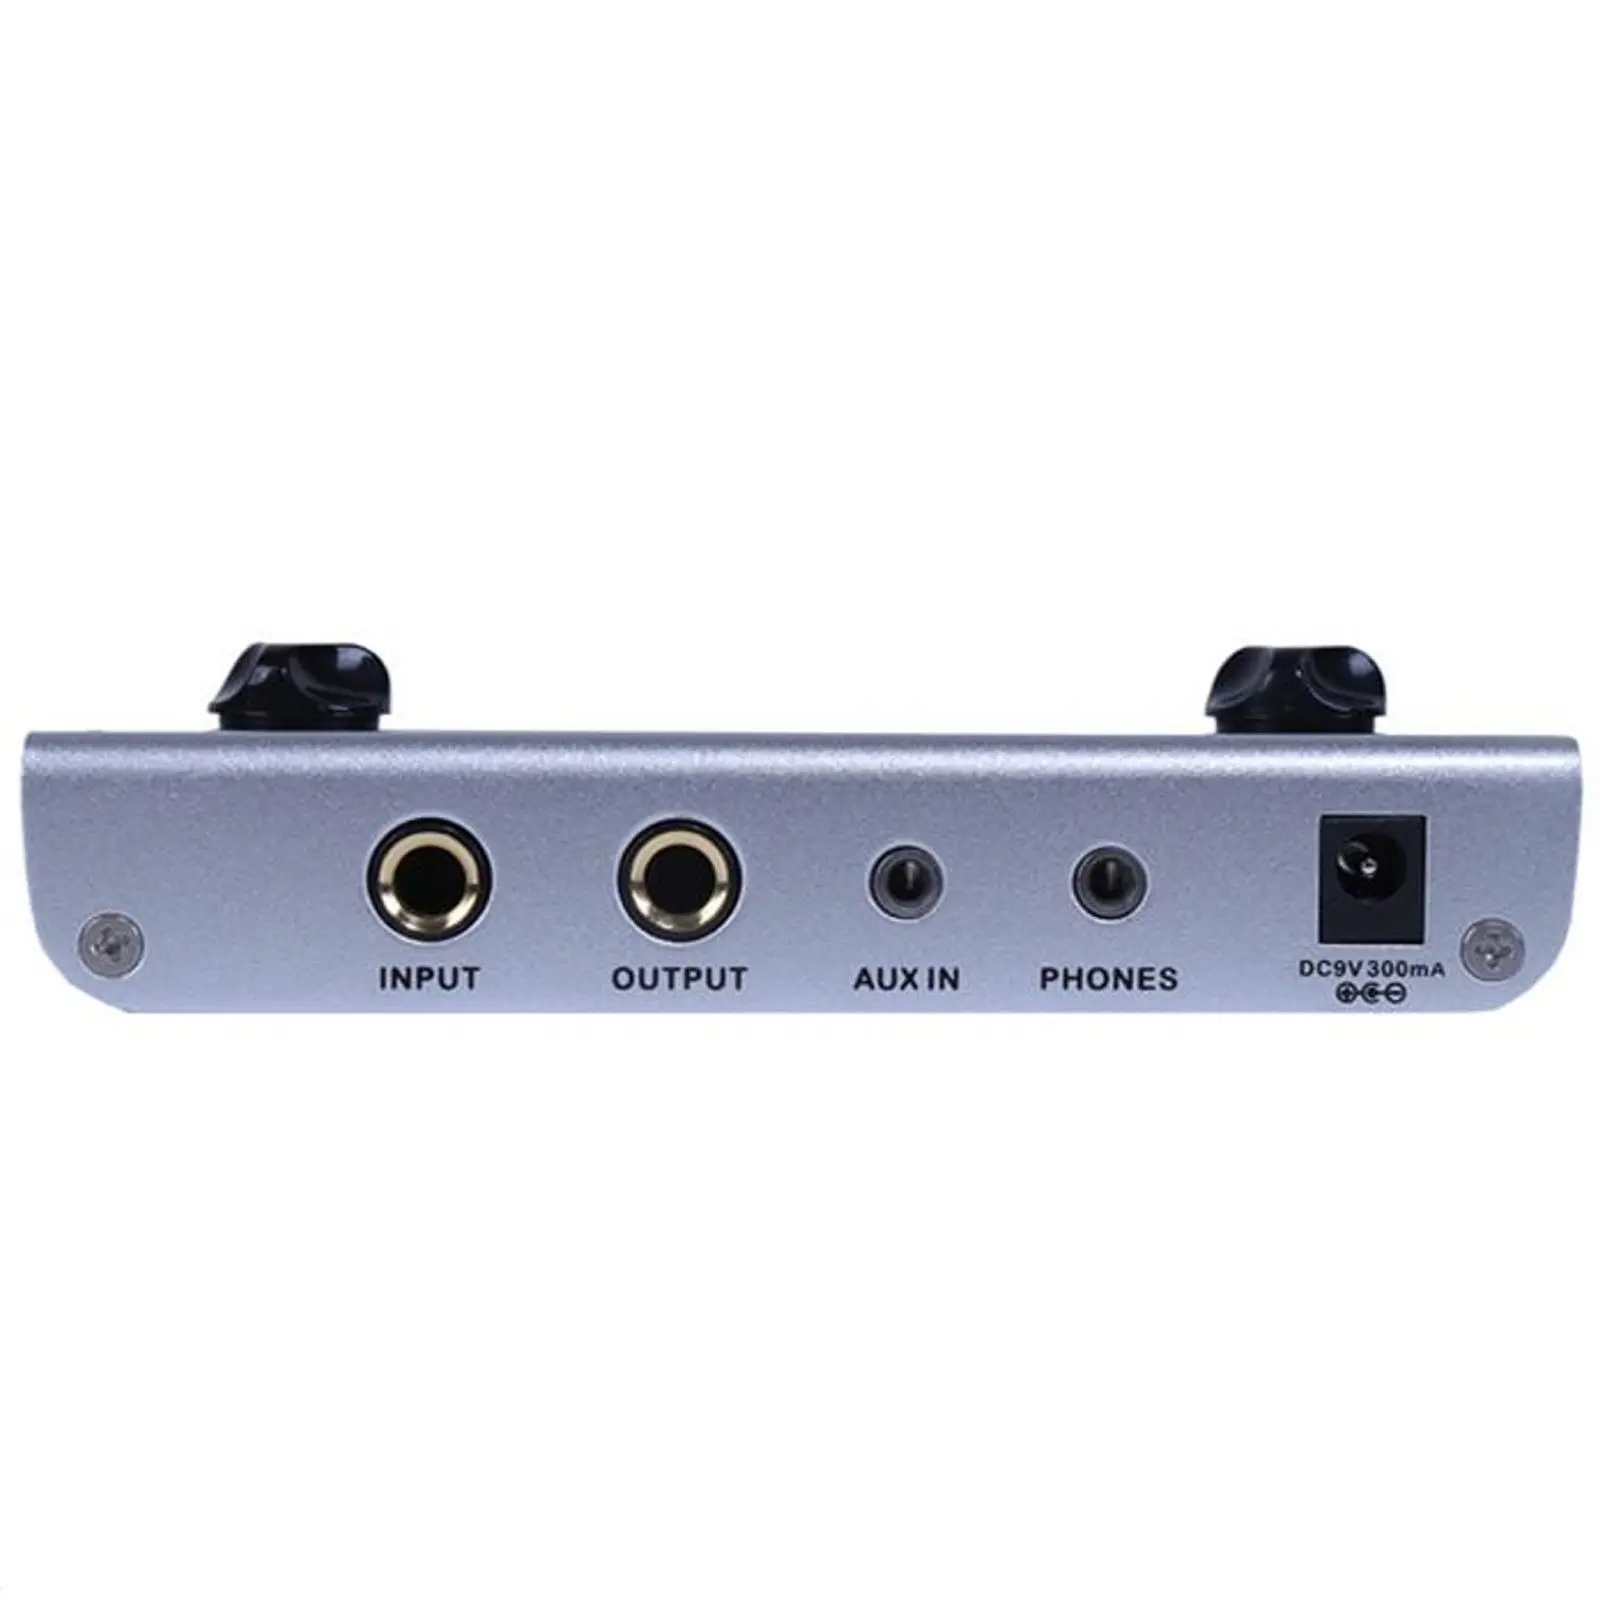 MOOER PE100 Multi-effects Processor Guitar Effect Pedal 39 Effects Guitar Pedal 40 Drum Patterns 10 Metronomes Tap Tempo enlarge